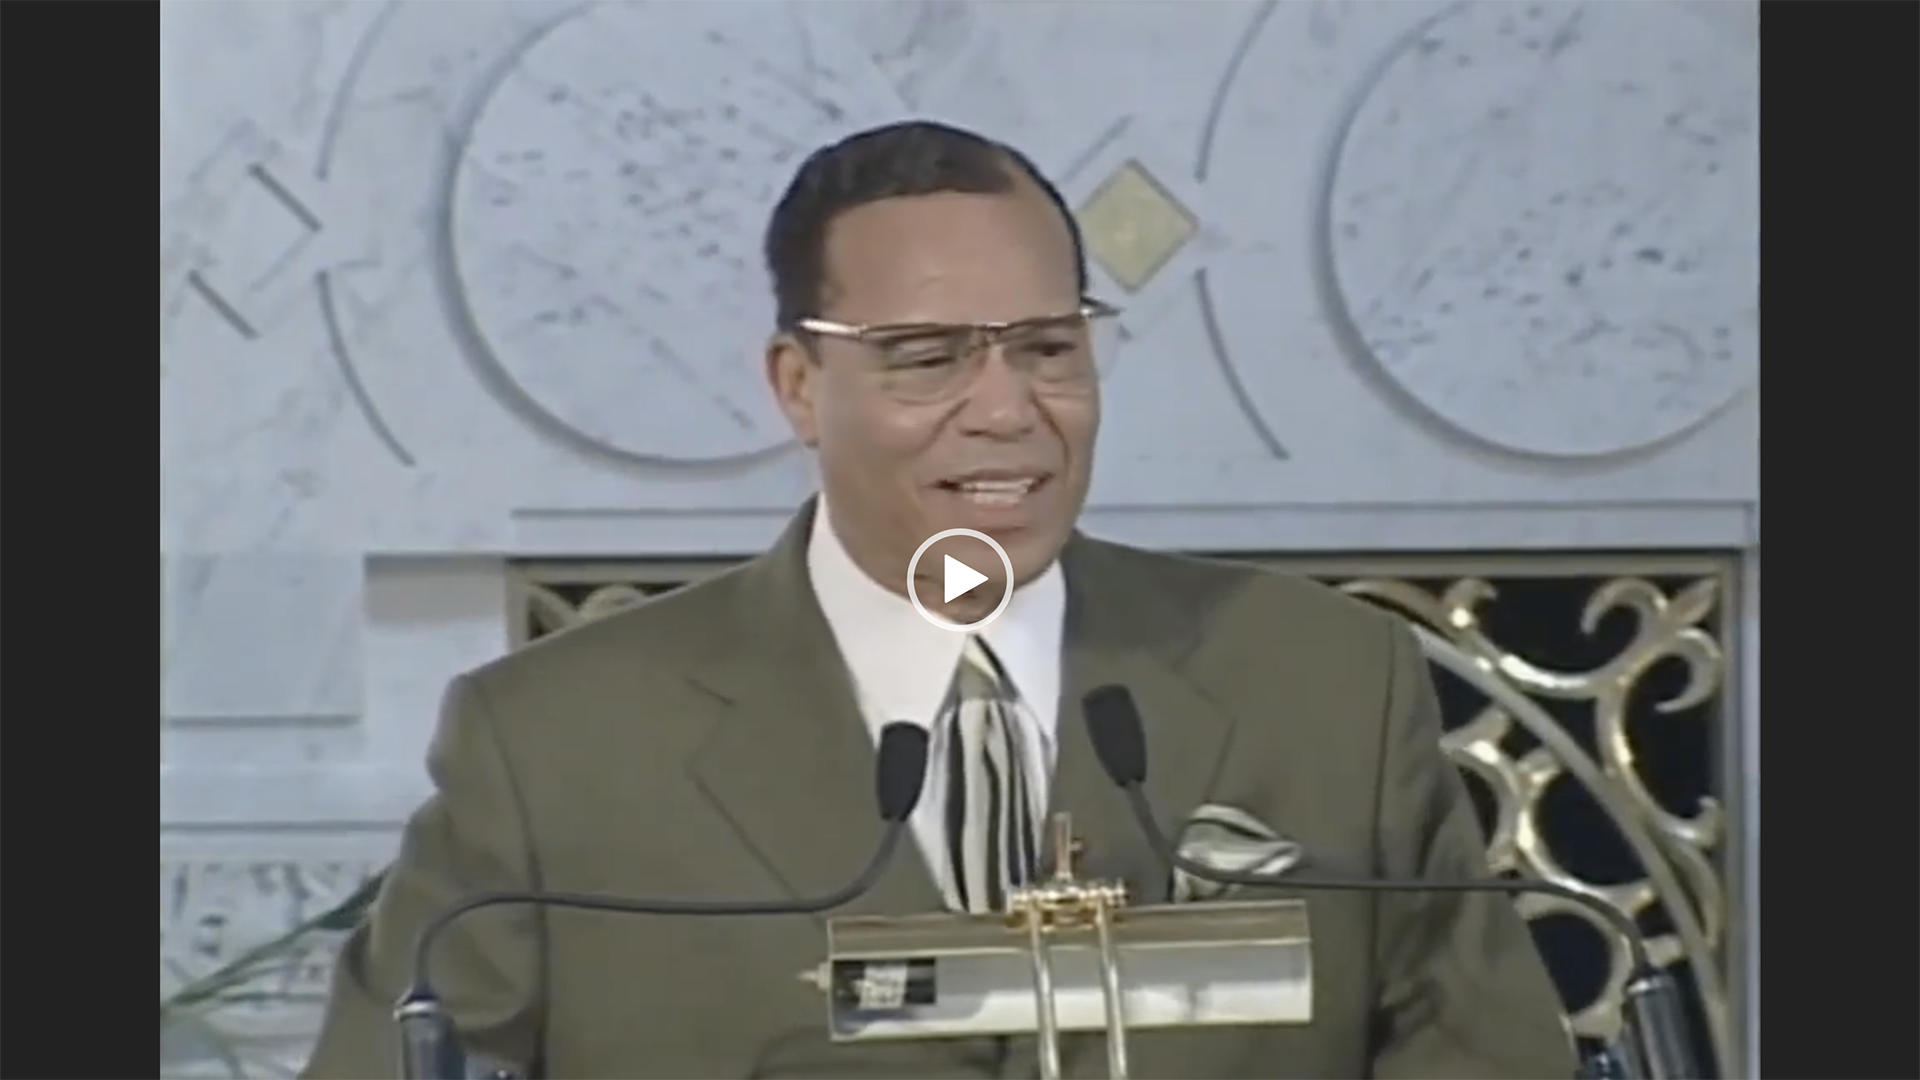 Minister Farrakhan asks the question: What did Jesus save you from?